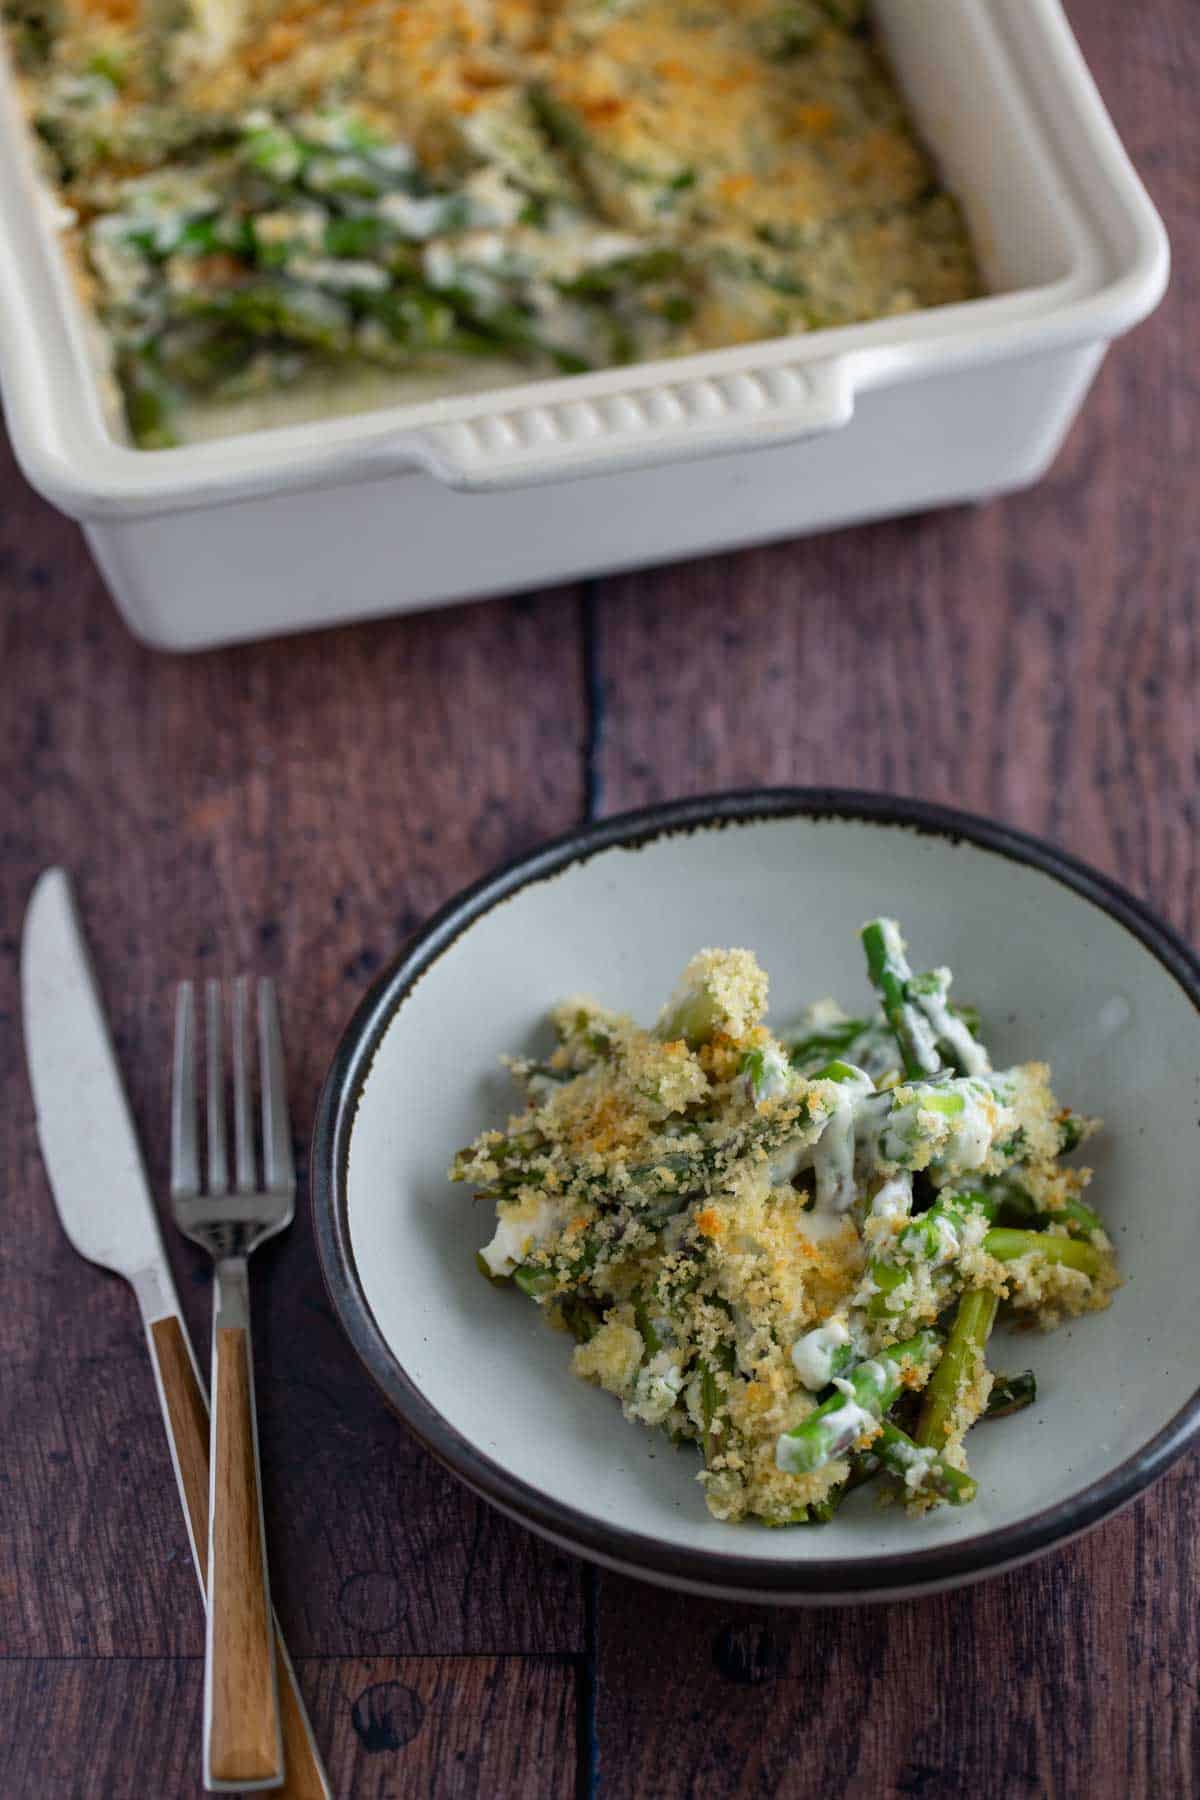 A serving of asparagus casserole on a plate with a fork and knife, beside a casserole dish.